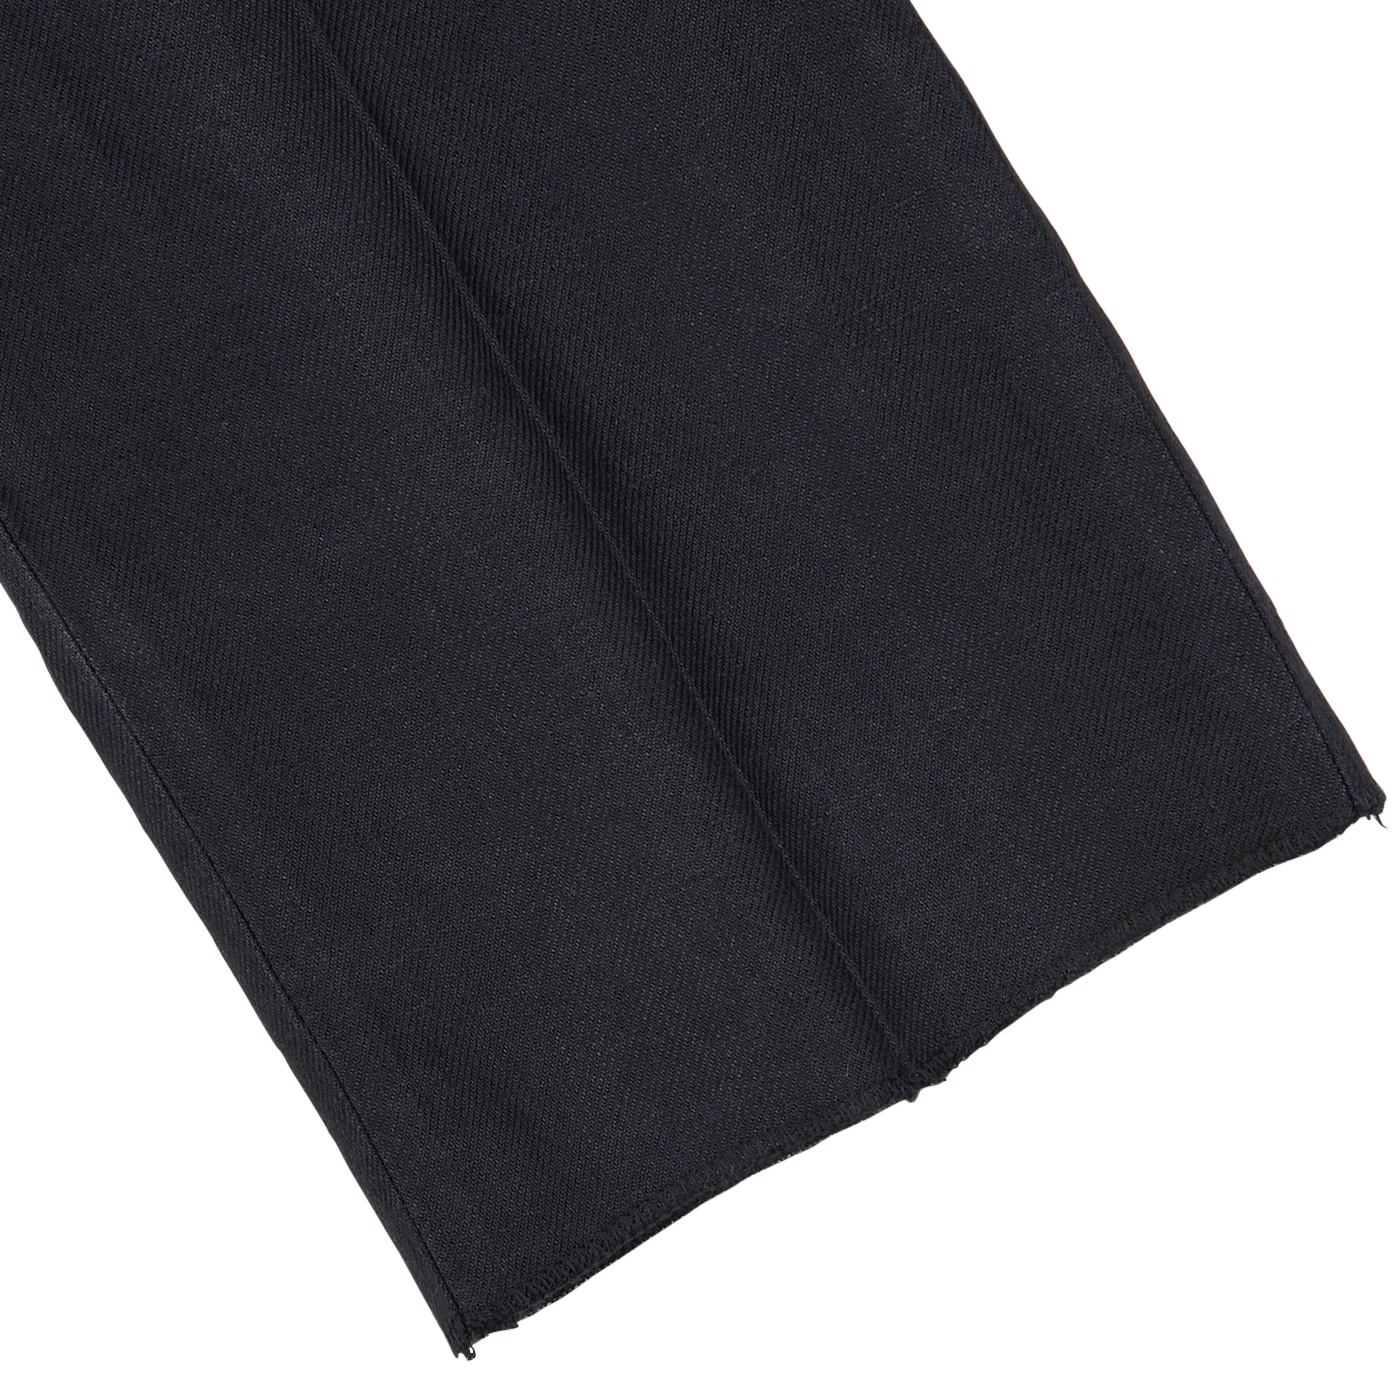 Navy blue washed Irish linen trousers with unfinished edges on a white background by Boglioli.